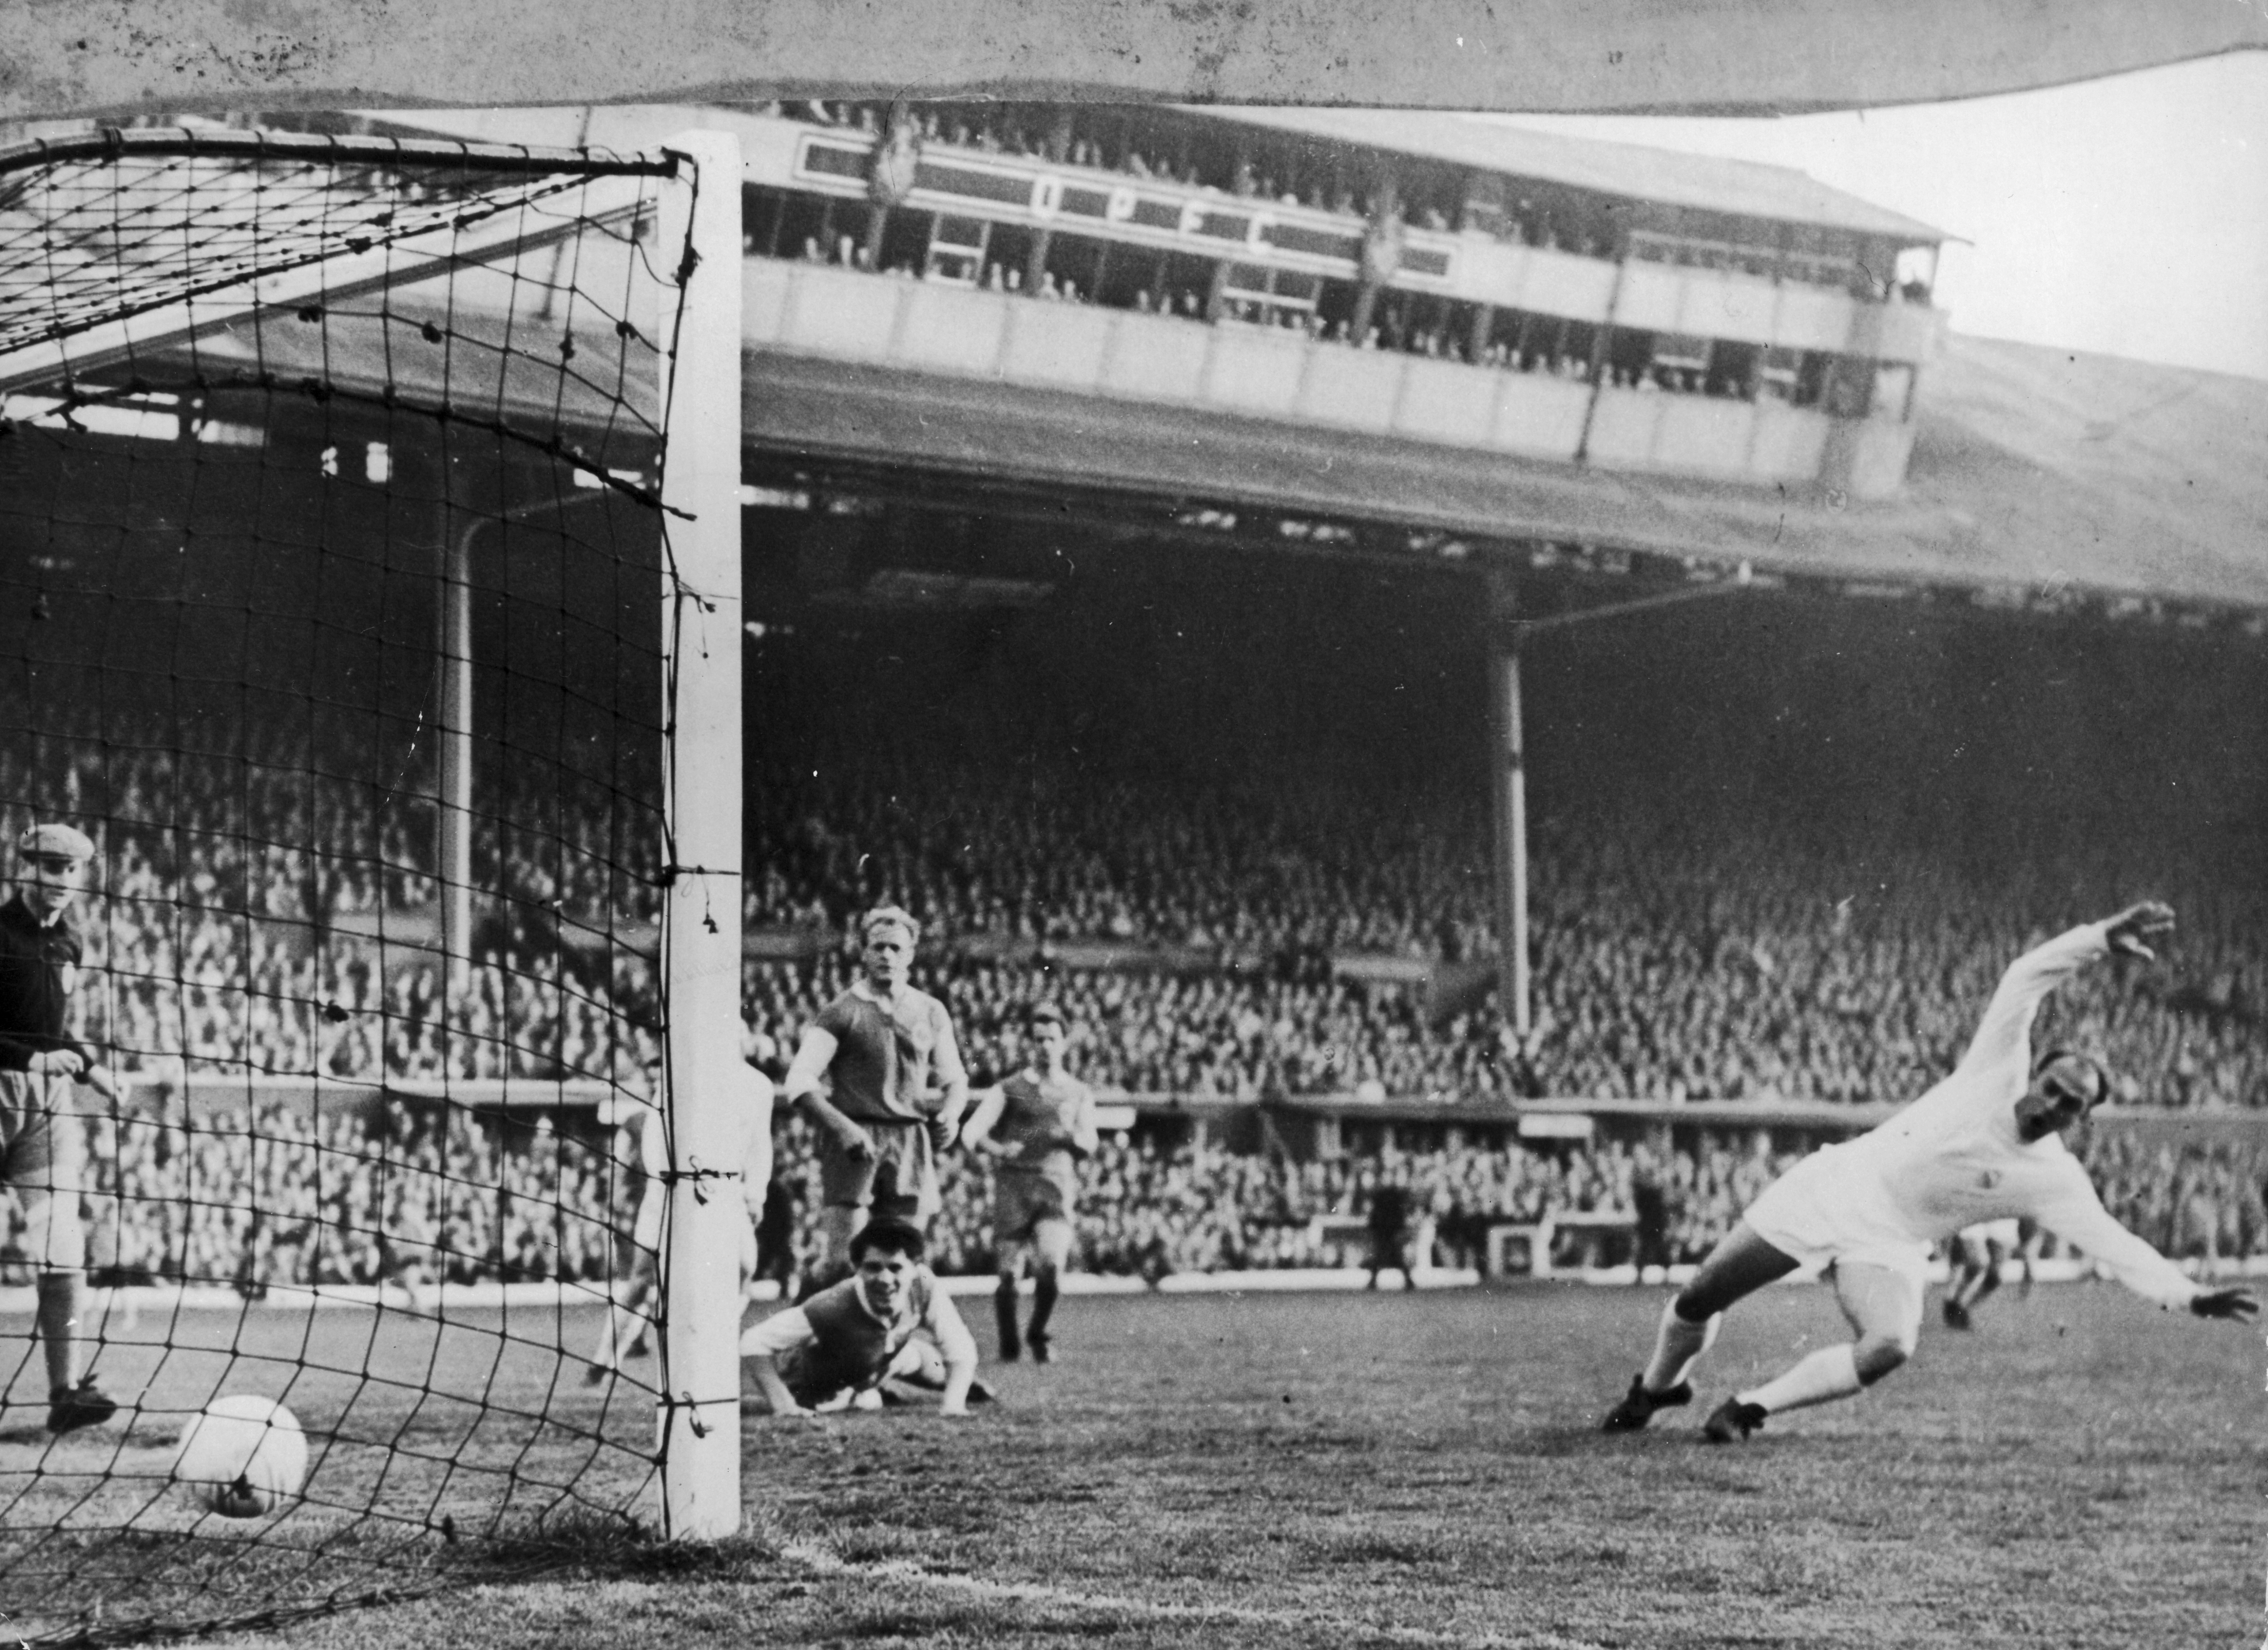 Alfredo Di Stefano of Real Madrid scores the first goal in the 1960 European Cup final at Hampden Park.